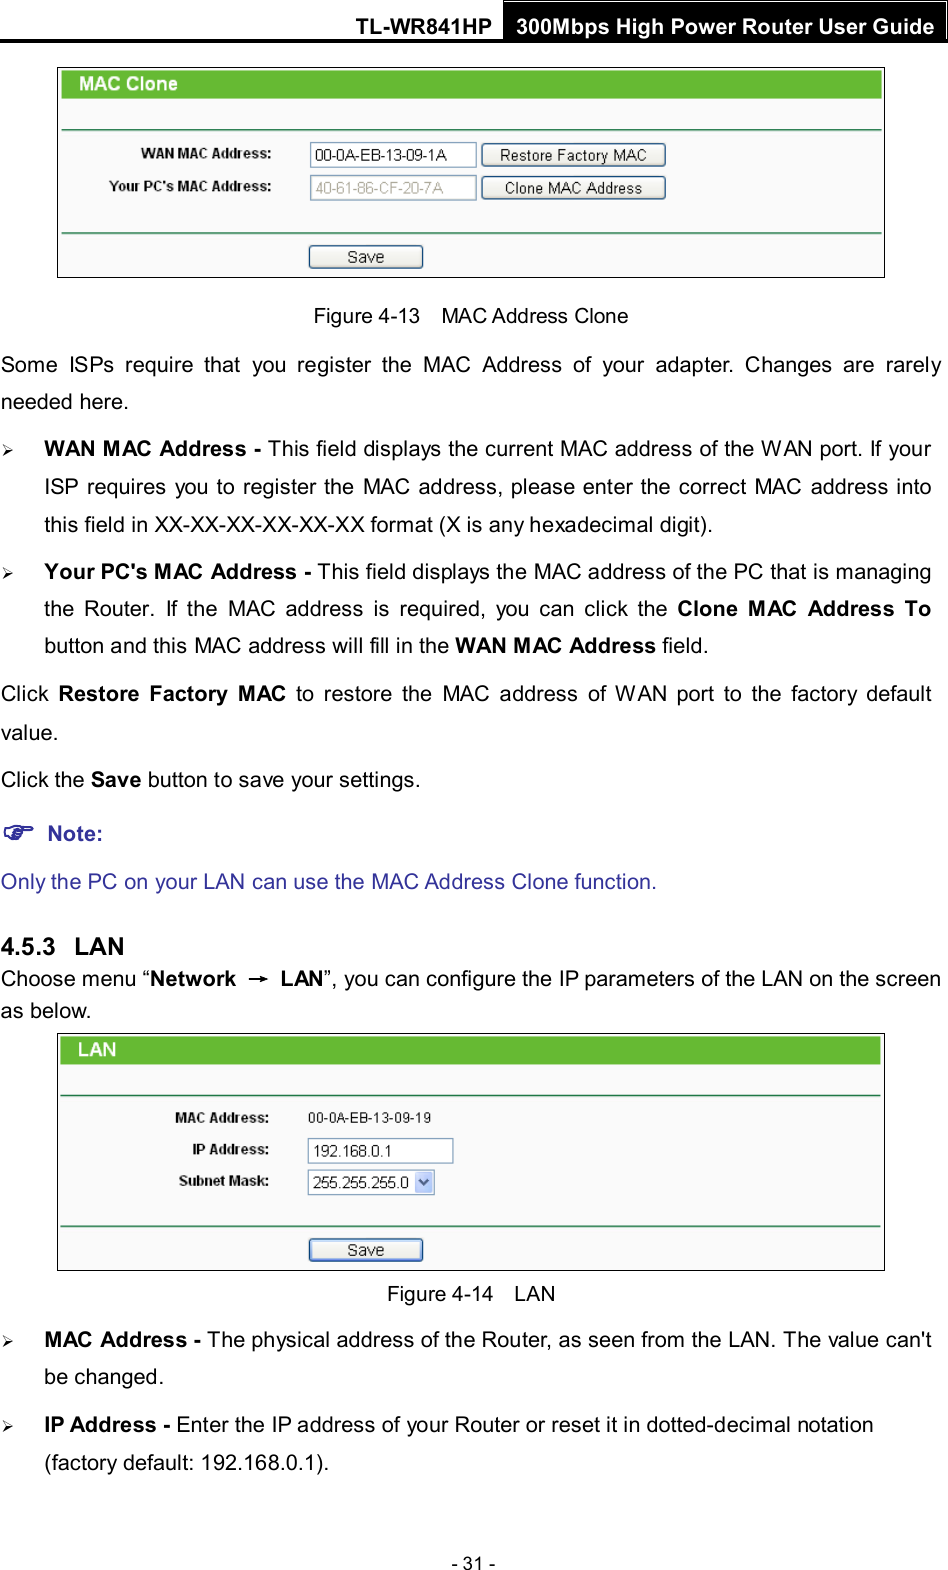 TL-WR841HP 300Mbps High Power Router User Guide  - 31 -  Figure 4-13  MAC Address Clone Some ISPs require that you register the MAC Address of your adapter.  Changes are rarely needed here.  WAN MAC Address - This field displays the current MAC address of the WAN port. If your ISP requires you to register the MAC address, please enter the correct MAC address into this field in XX-XX-XX-XX-XX-XX format (X is any hexadecimal digit).    Your PC&apos;s MAC Address - This field displays the MAC address of the PC that is managing the Router. If the MAC address is required, you can click the Clone MAC Address To button and this MAC address will fill in the WAN MAC Address field. Click  Restore Factory MAC to restore the MAC address of WAN port to the factory default value. Click the Save button to save your settings.  Note:   Only the PC on your LAN can use the MAC Address Clone function. 4.5.3 LAN Choose menu “Network  → LAN”, you can configure the IP parameters of the LAN on the screen as below.  Figure 4-14  LAN  MAC Address - The physical address of the Router, as seen from the LAN. The value can&apos;t be changed.  IP Address - Enter the IP address of your Router or reset it in dotted-decimal notation (factory default: 192.168.0.1). 